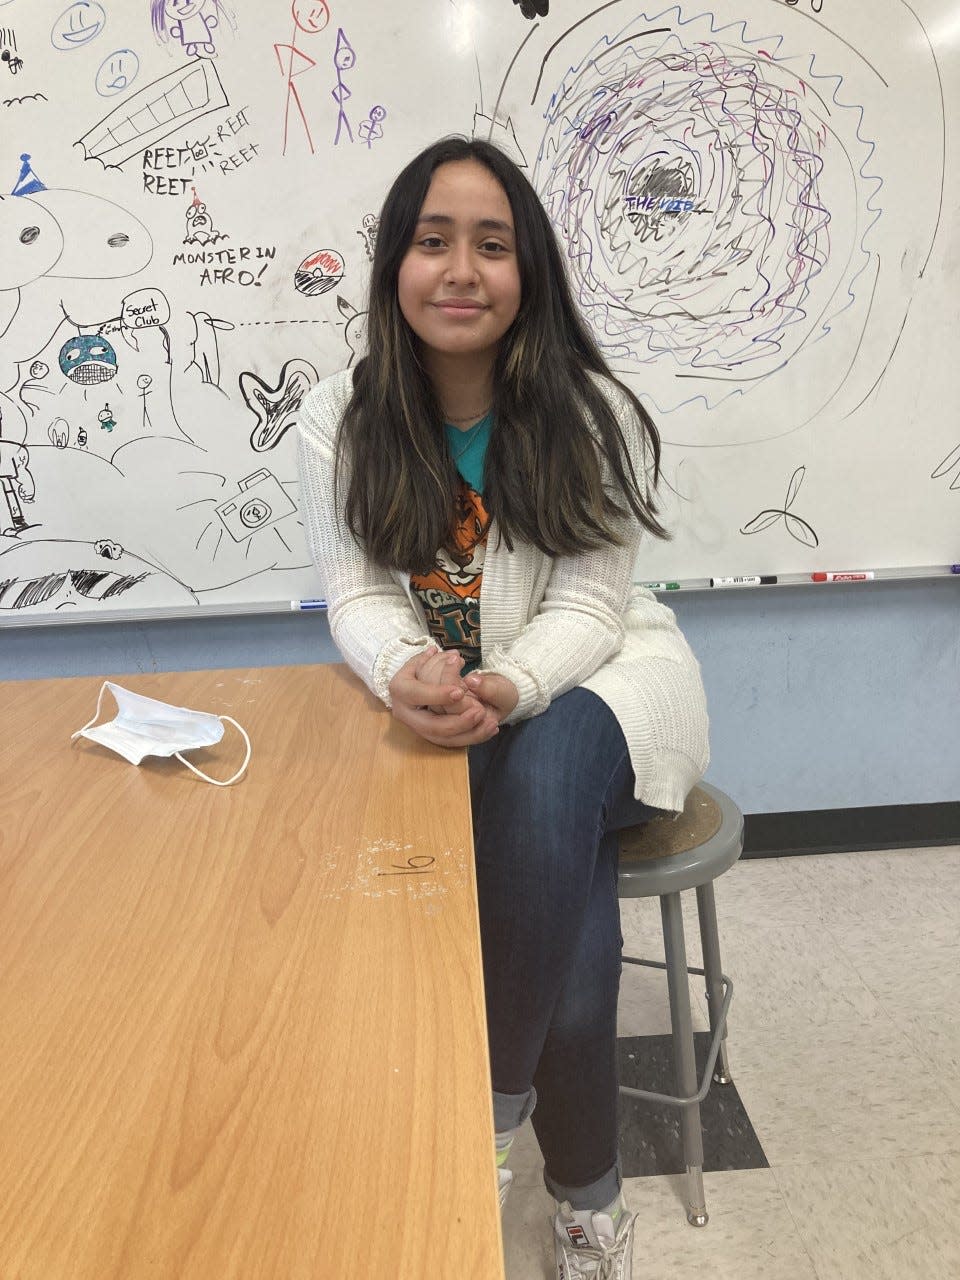 Harmony School of Excellence student  Mia Rodriguez, 11, said she transferred her emotions about social media into her interactive art project.